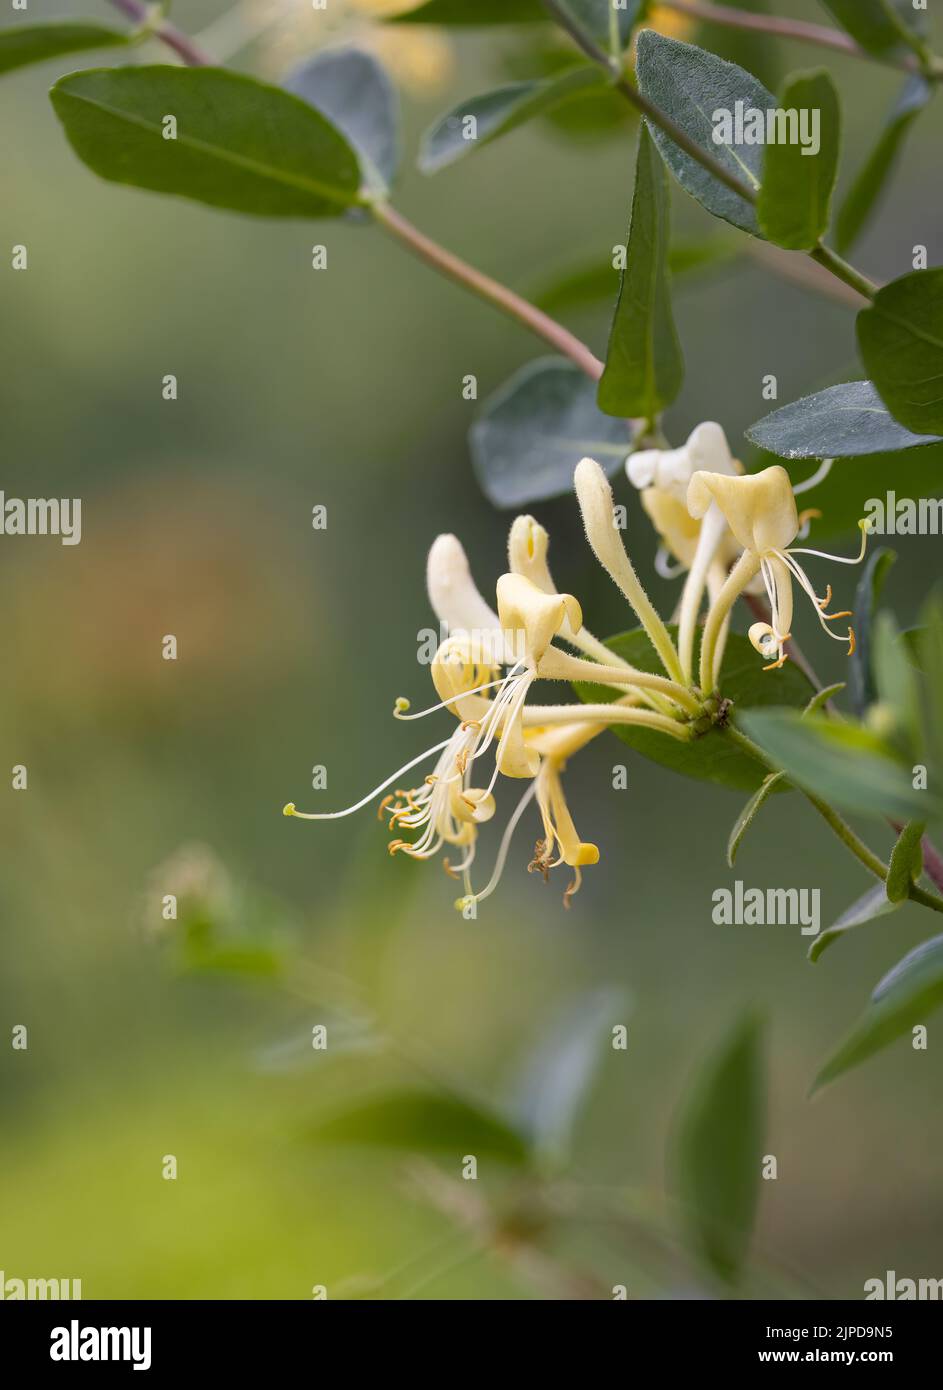 A beautiful Common Honeysuckle (Lonicera periclymenum) with out of focus green foliage flowers in the background Stock Photo